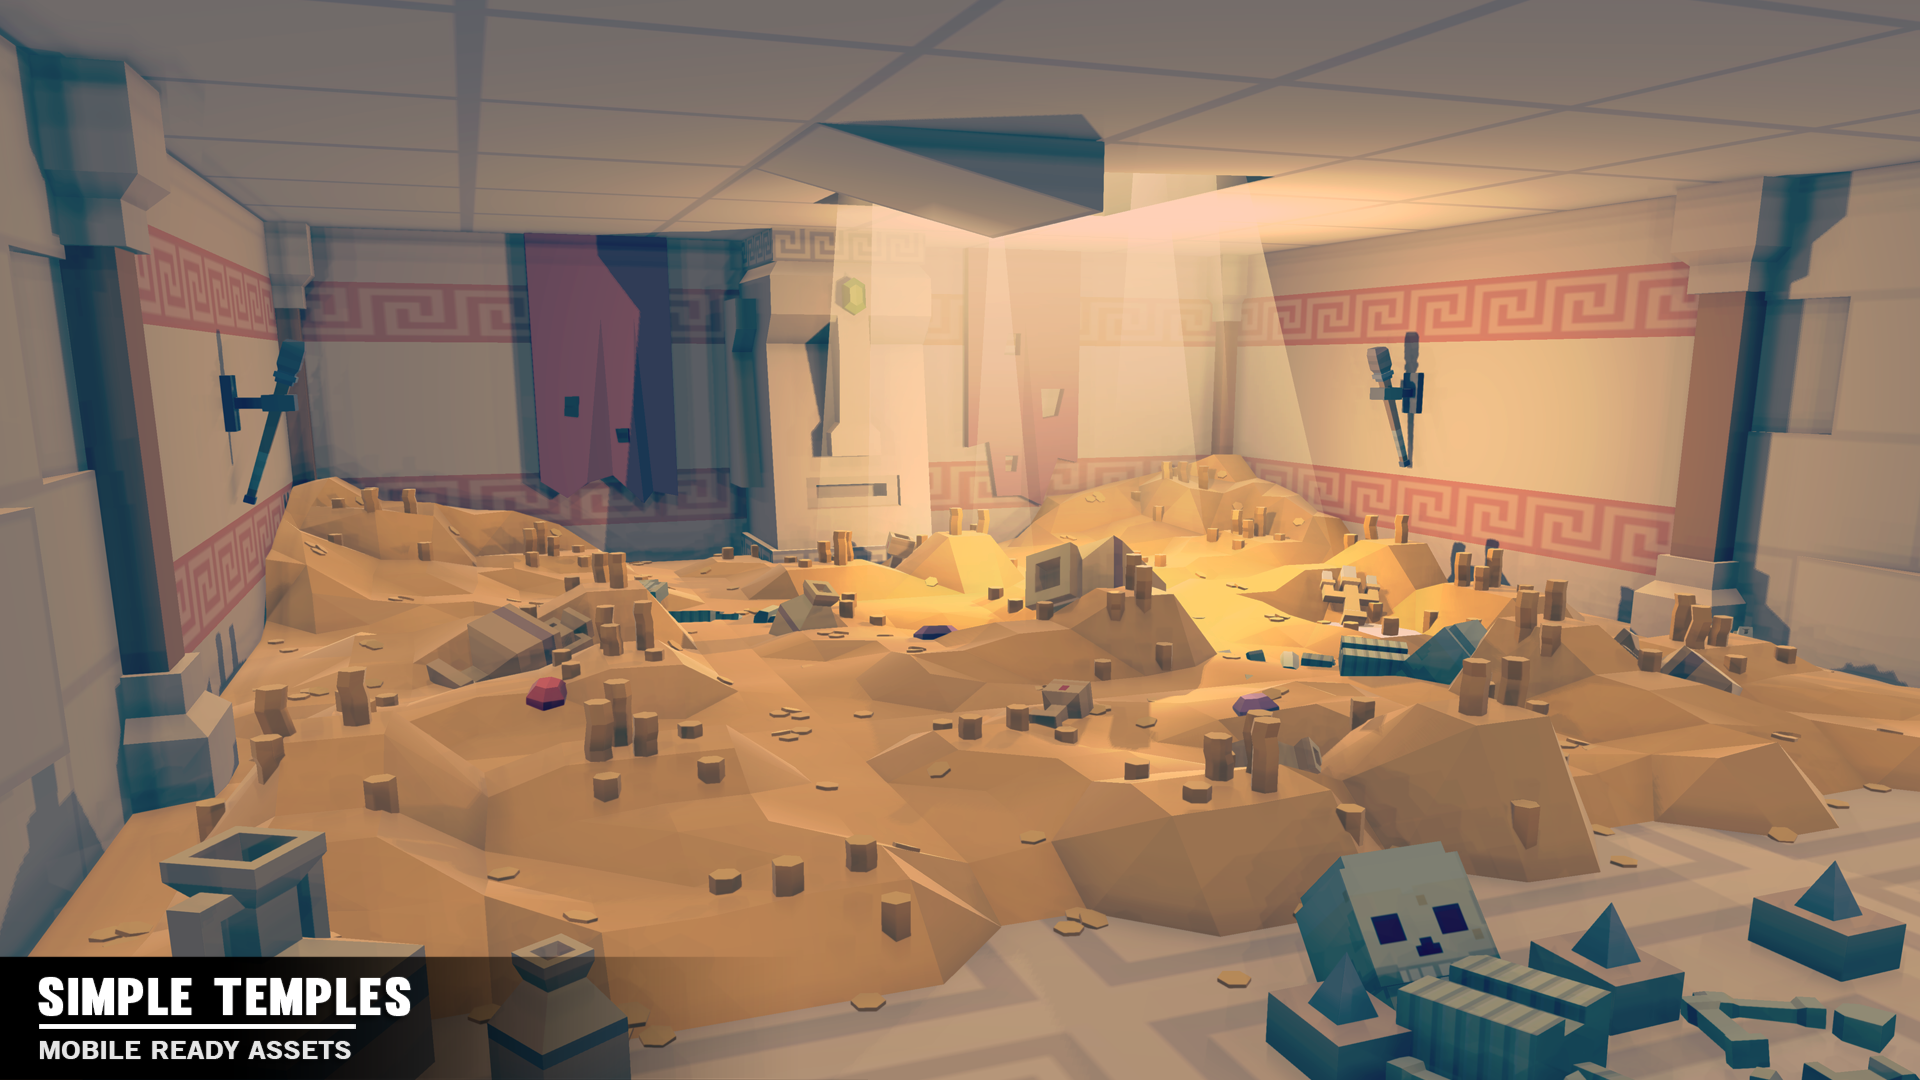 Low poly gold room within a temple and skeletons lying along the floor with scattered jewelry and other sacred objects